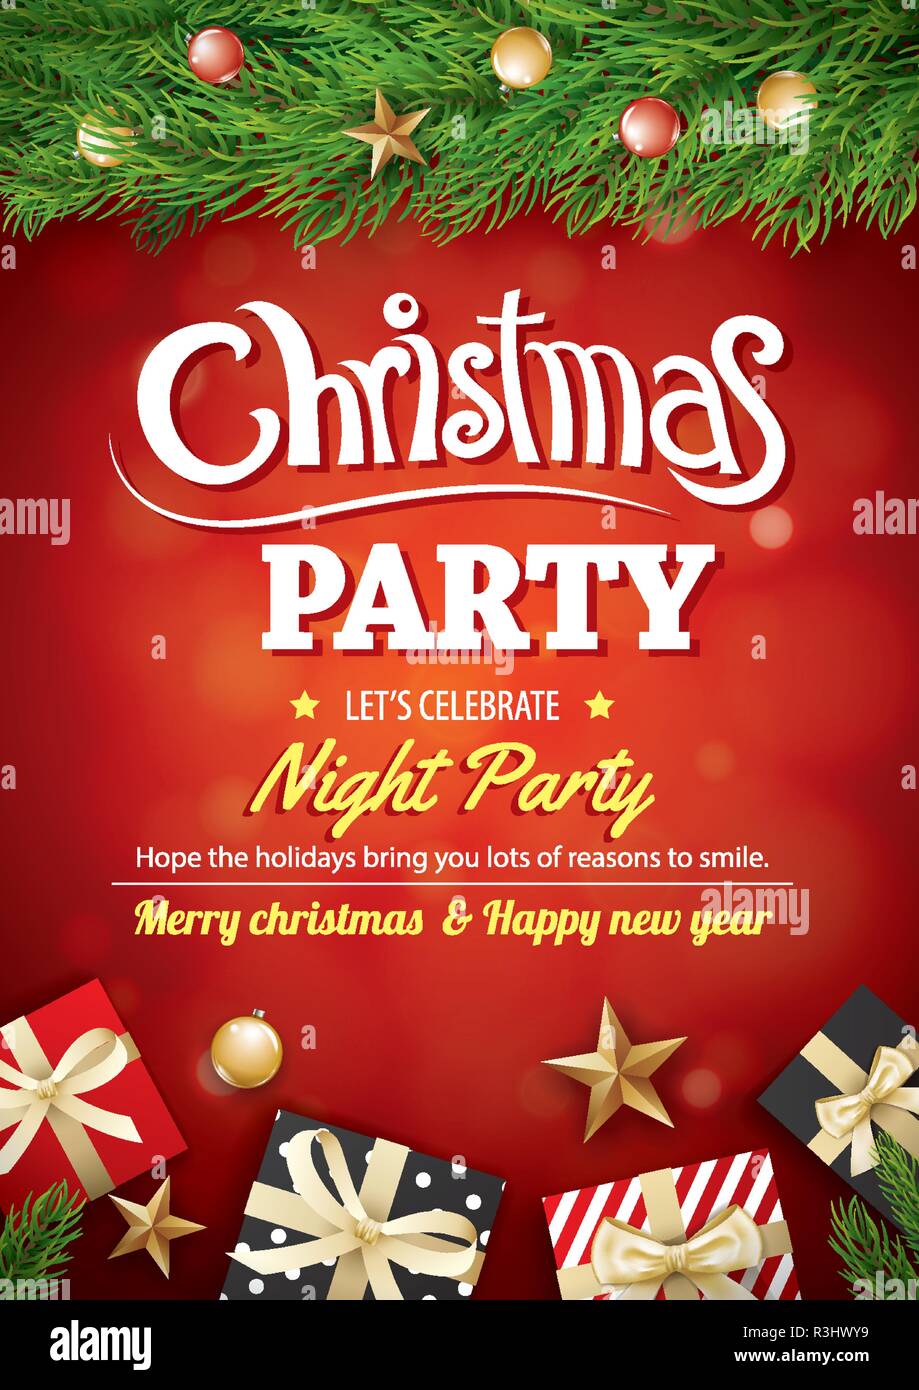 Merry christmas party gift box and tree on red background invitation ...